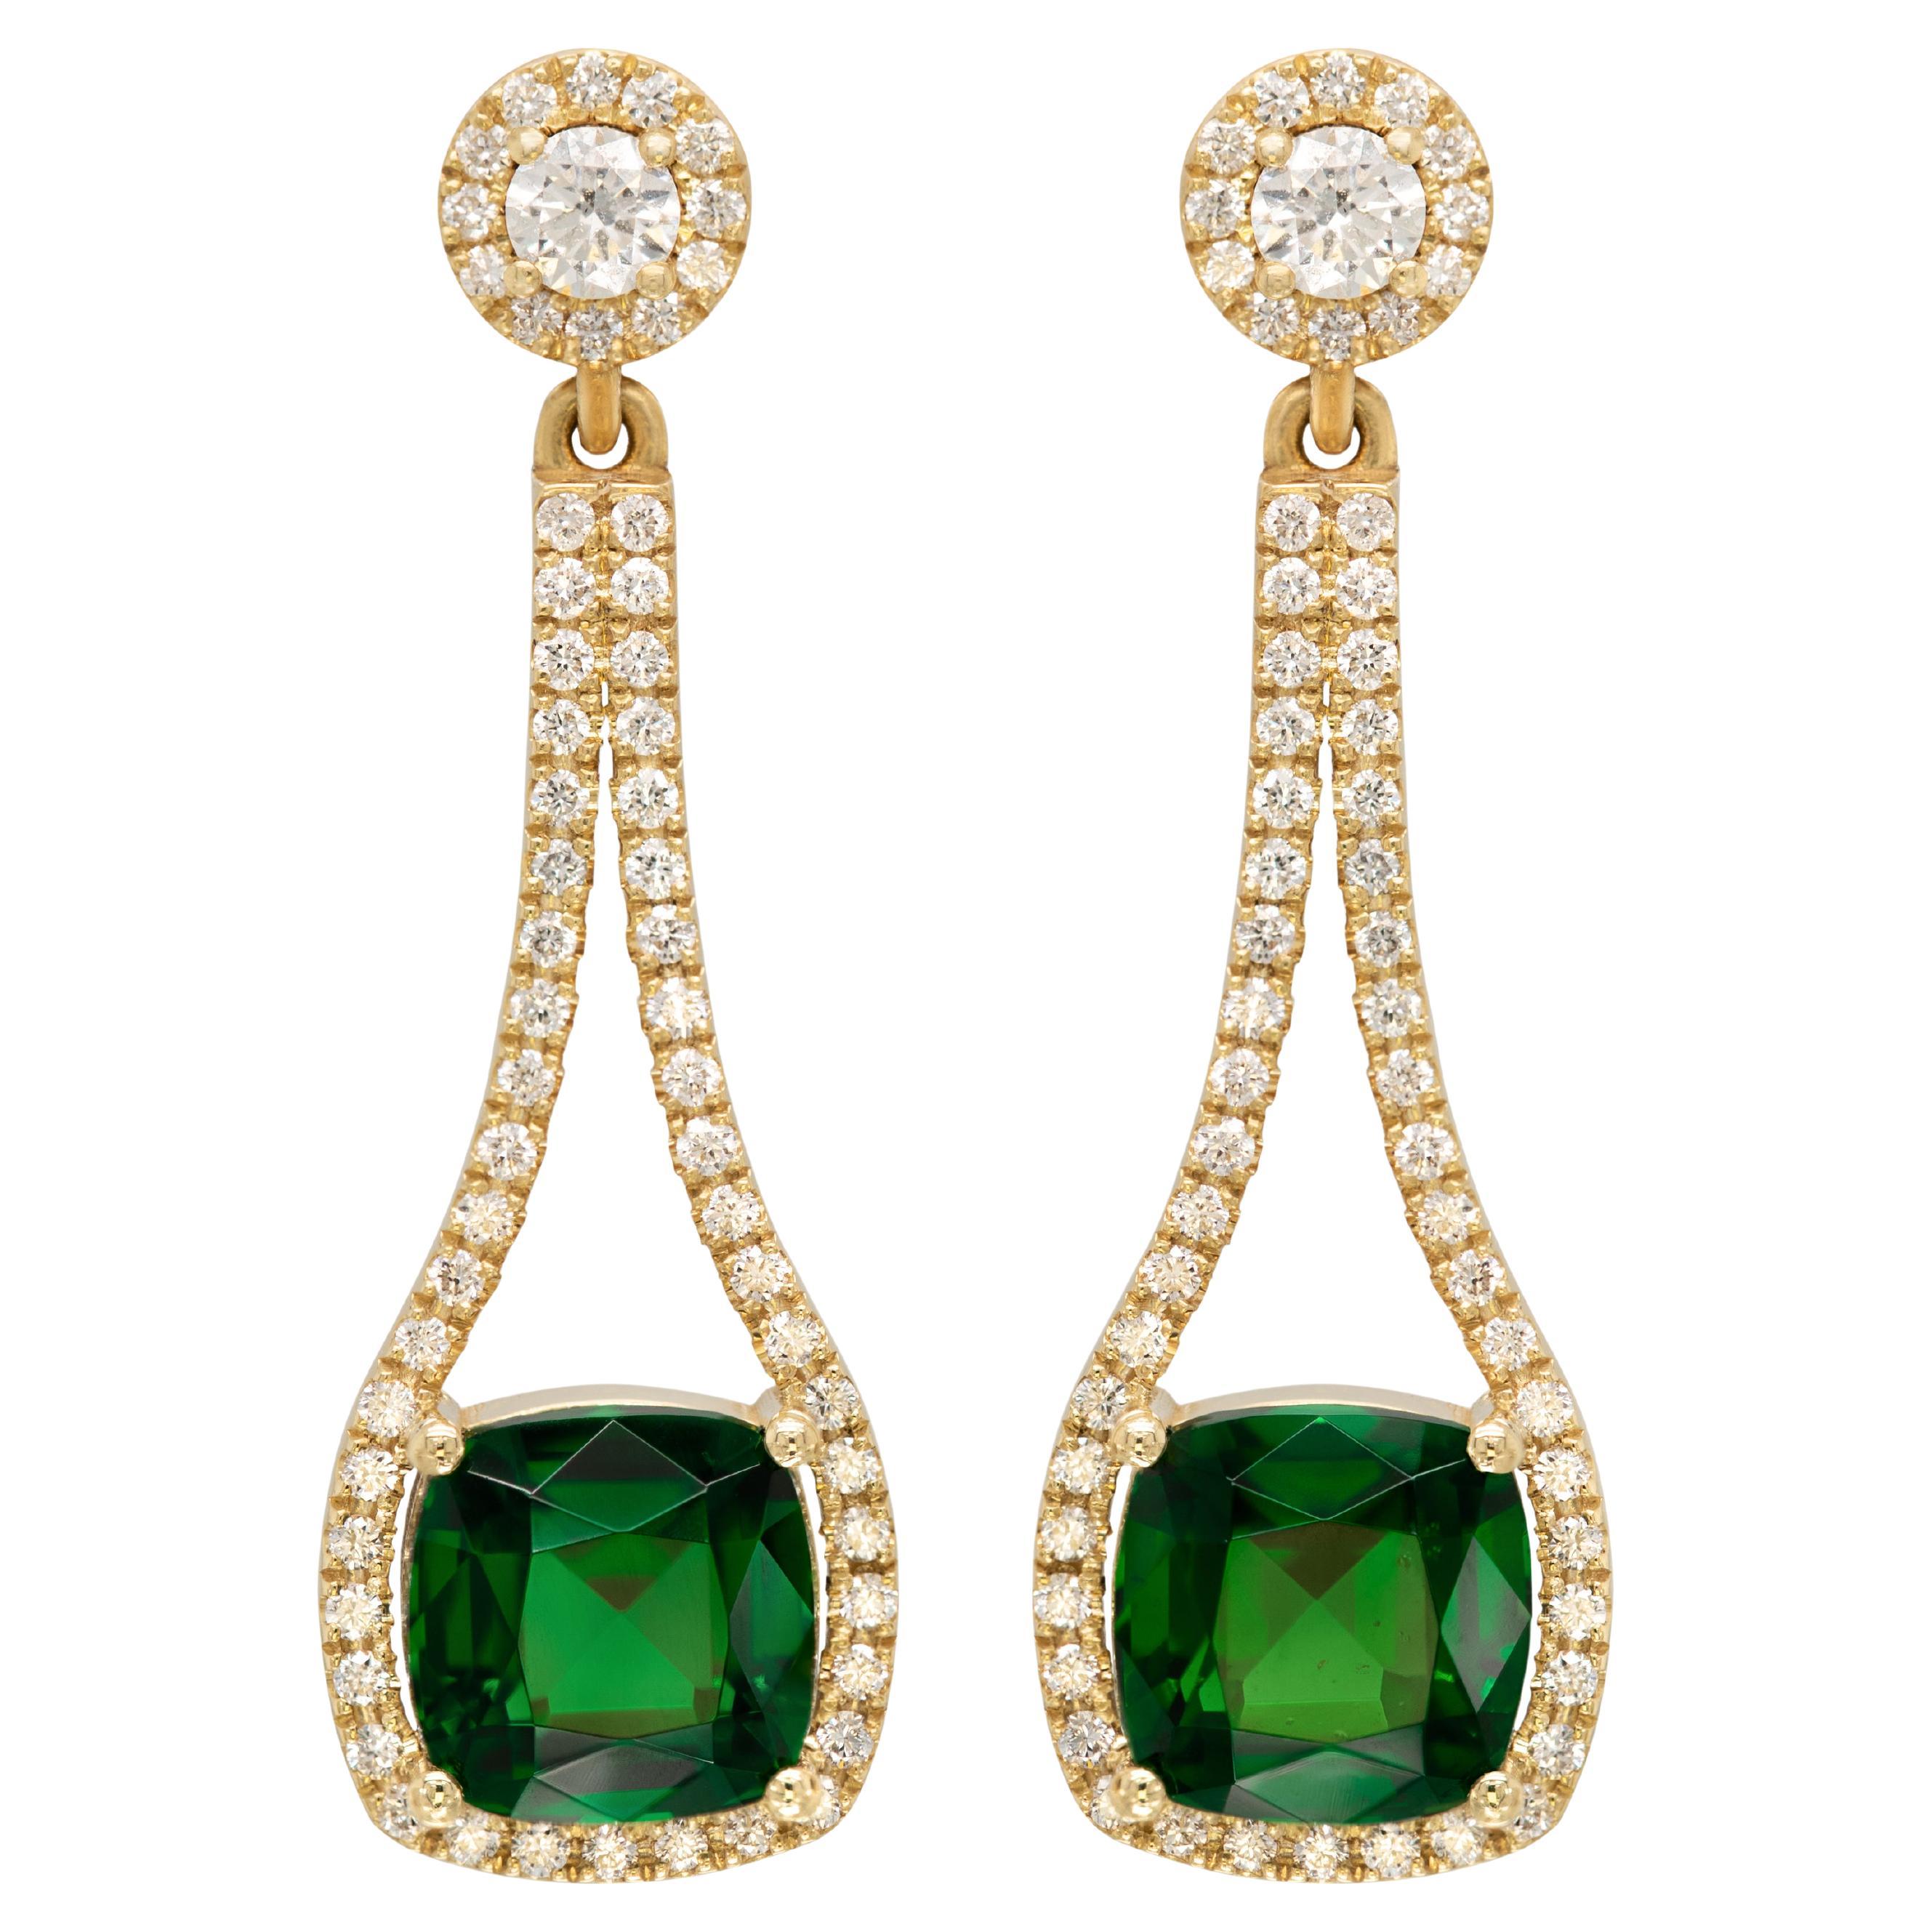 Natural Tourmalines 4.57 Carats set in 18K Yellow Gold Earrings with Diamonds For Sale